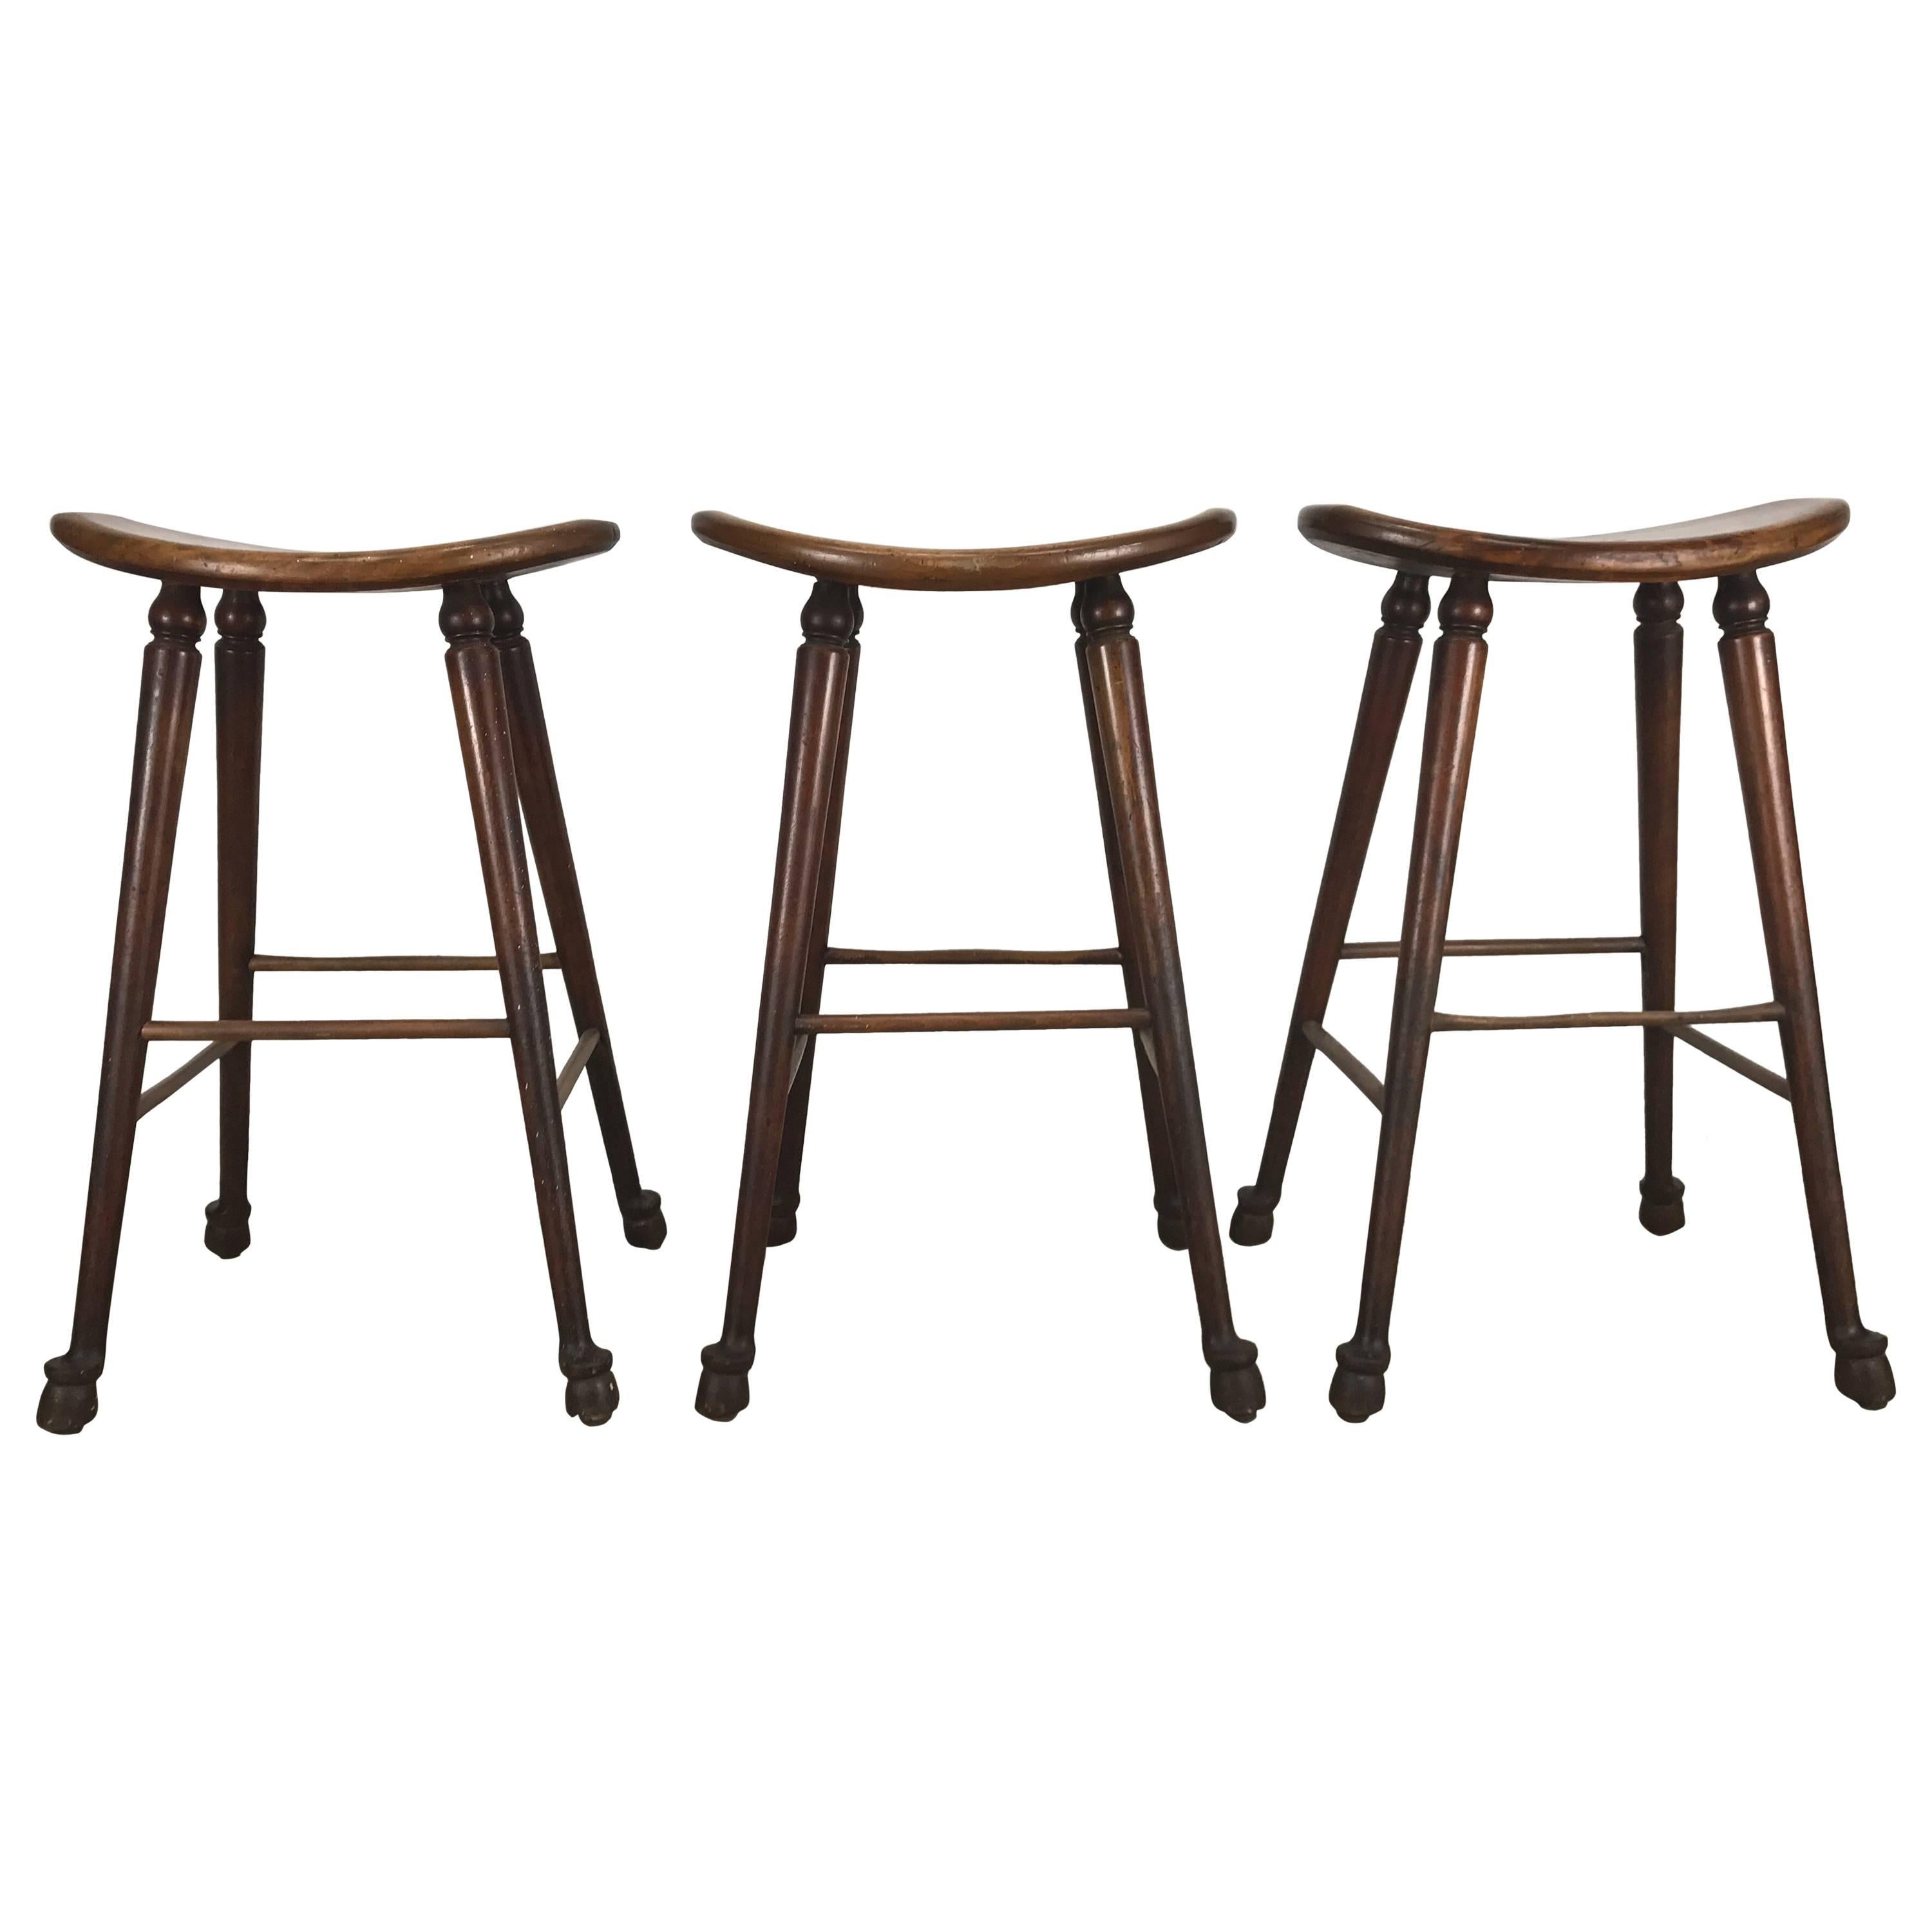 Unusual Set of Three Antique Hooved Saloon Stools Bar or Counter Cowboy Modern